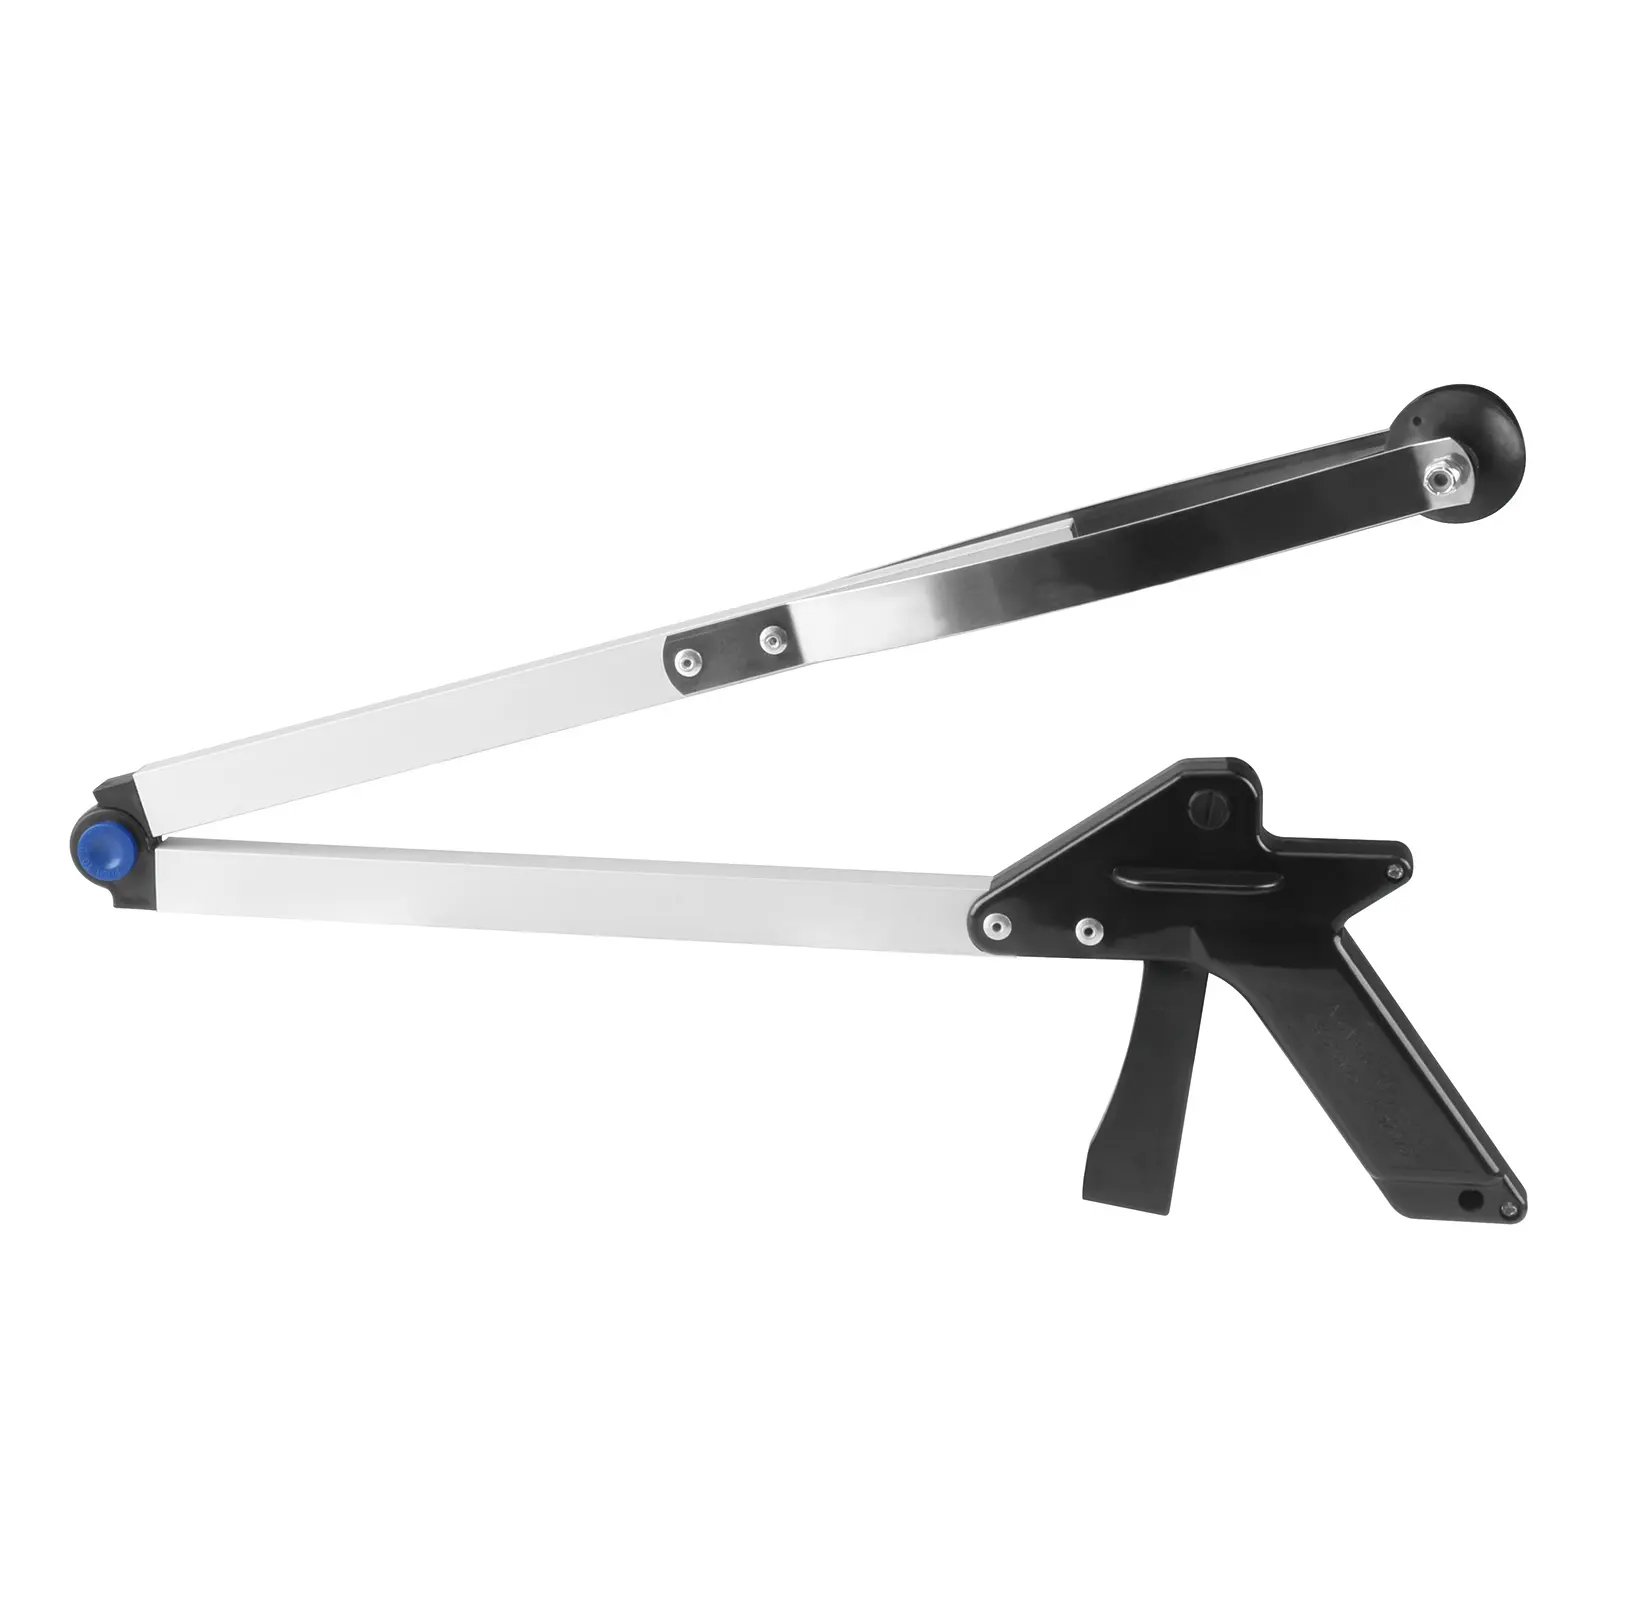 ZA-X18 pick up foldable stick with suckers for elderly reacher tool